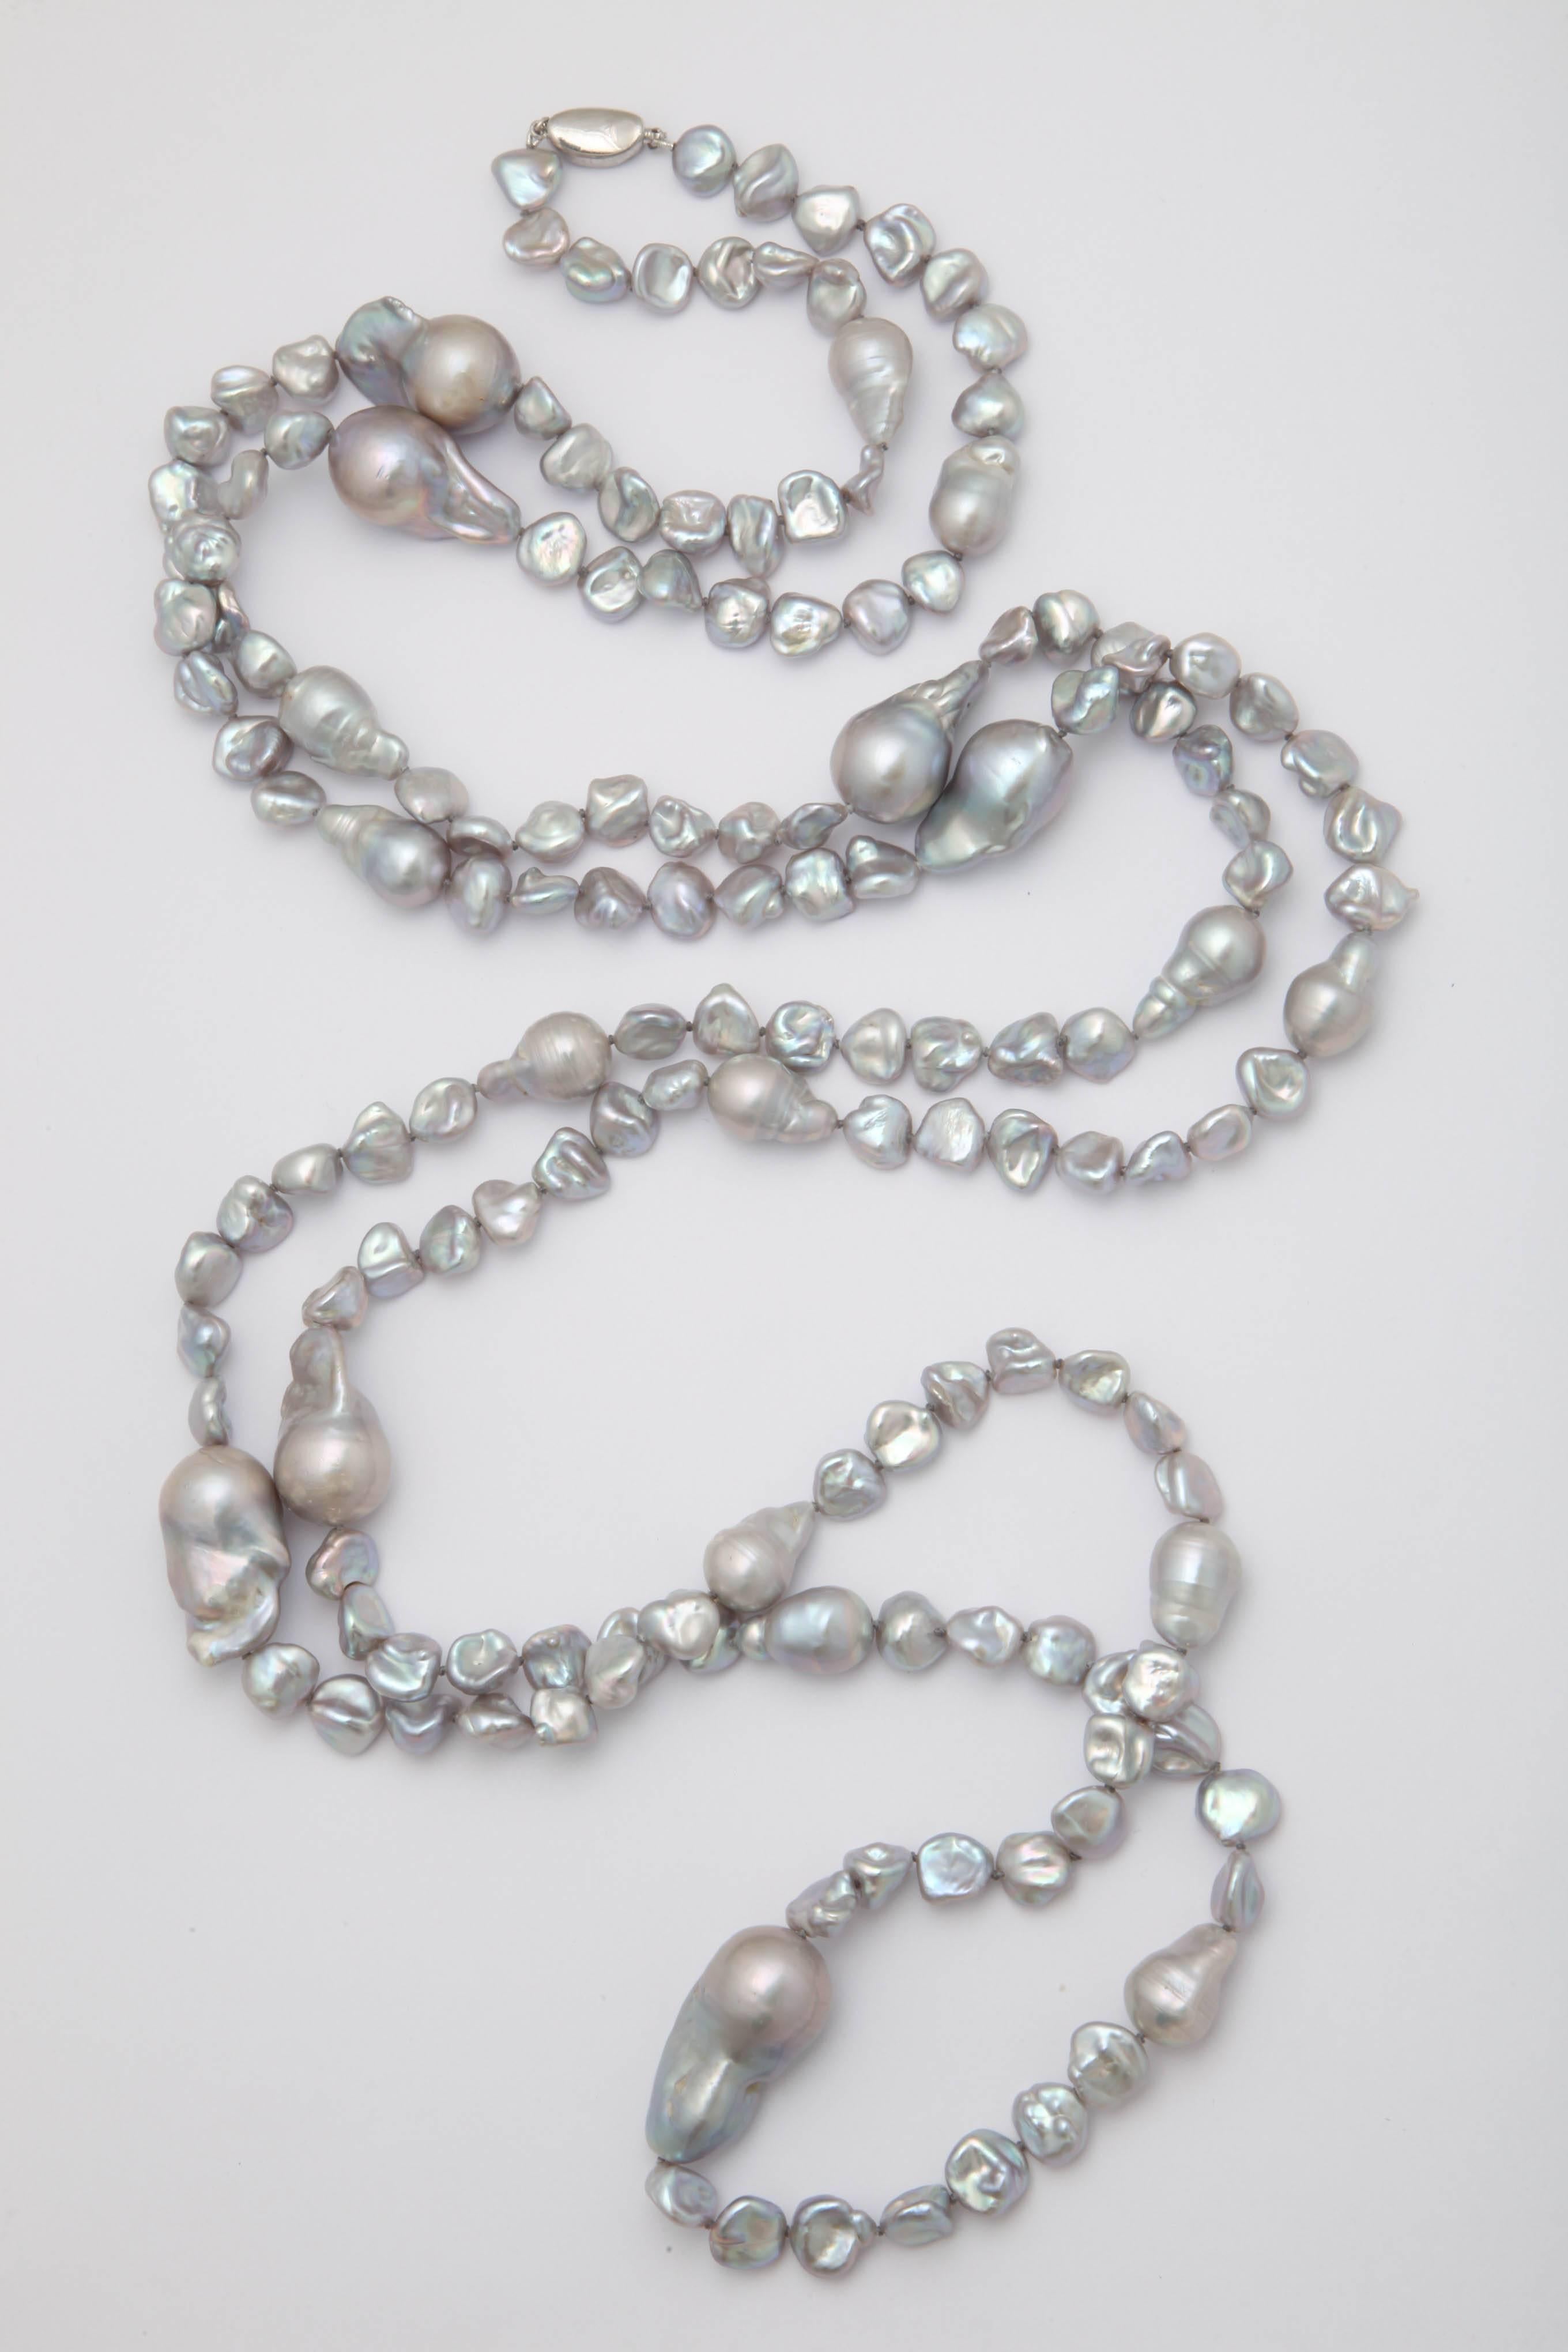 Large grey fresh water baroque pearls, average length 1 1/4 in. ,interspersed  with  3/8 to 1/2 in keshi grey fresh water pearls to create a magnificent necklace 70 in. long with a sterling silver clasp. This necklace can be worn in many way and can